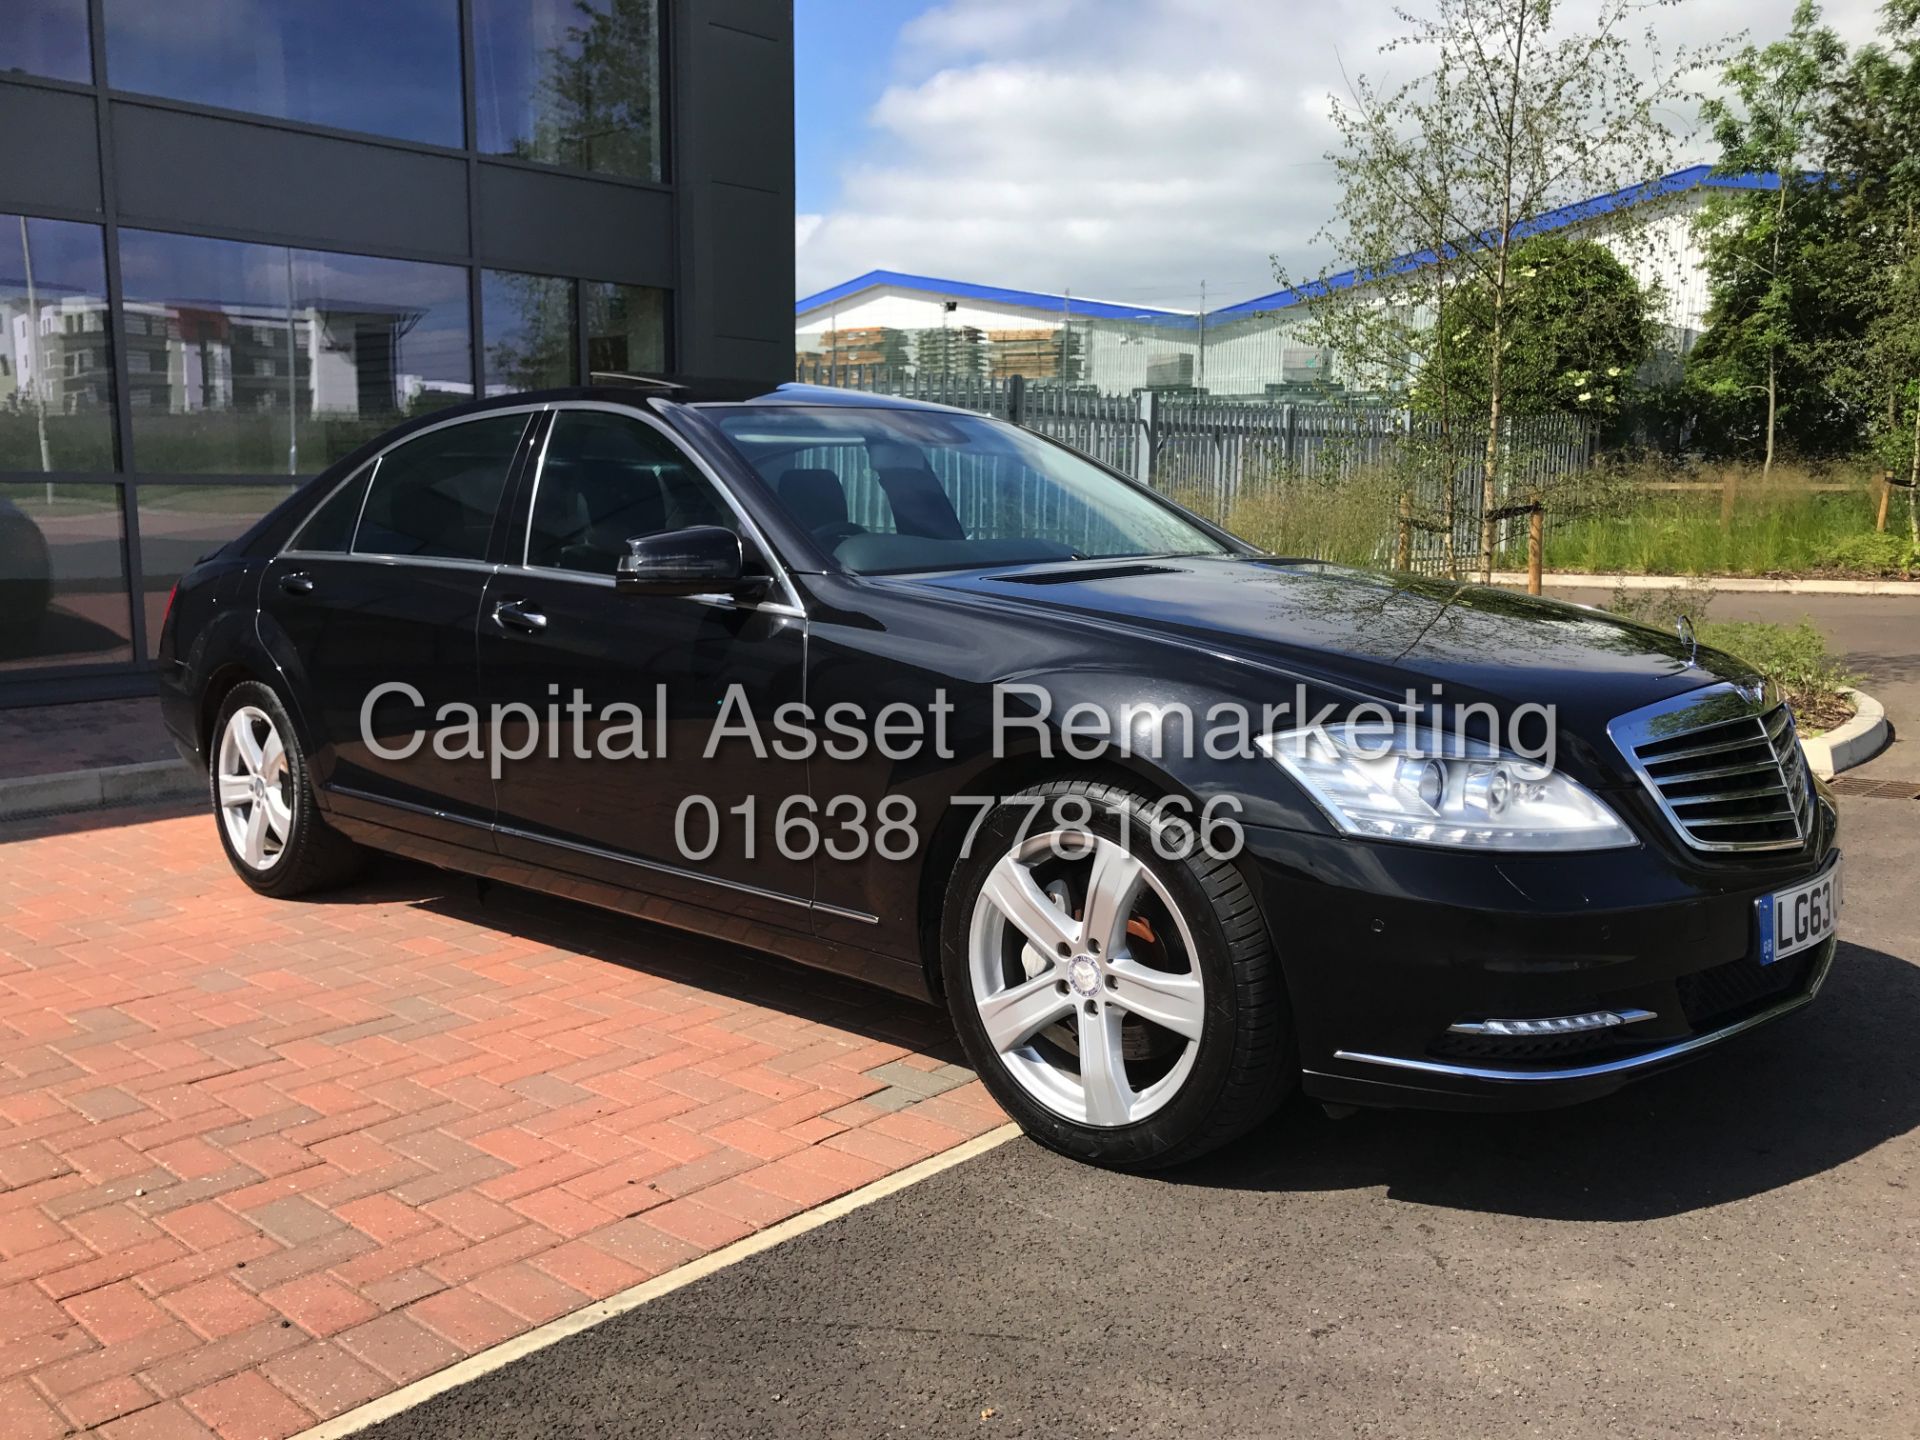 (ON SALE) MERCEDES S350CDI (2014 MODEL) LWB LIMO - SAT NAV - GLASS ROOF **ABSOLUTLY LOADED** - Image 2 of 37